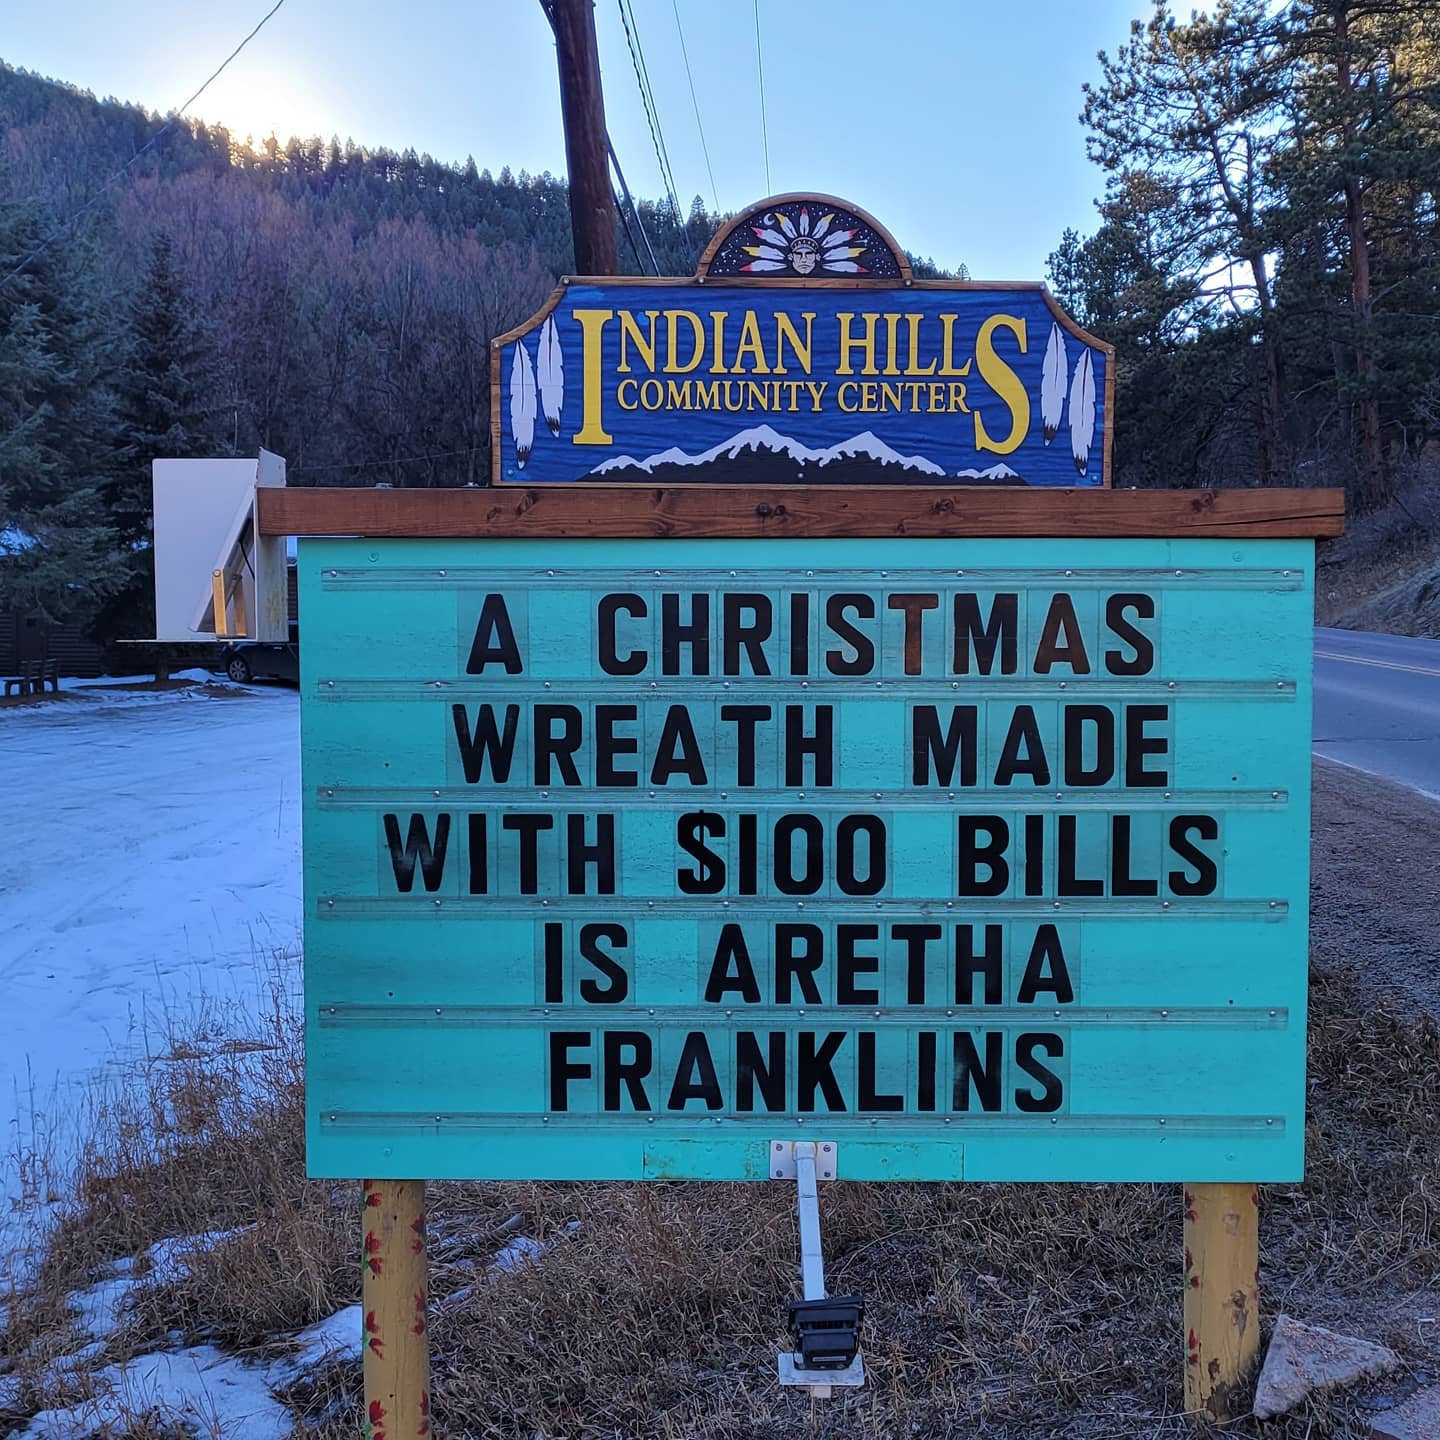 community sign that says: "a Christmas wreath made with $100 bills is Aretha Franklins"